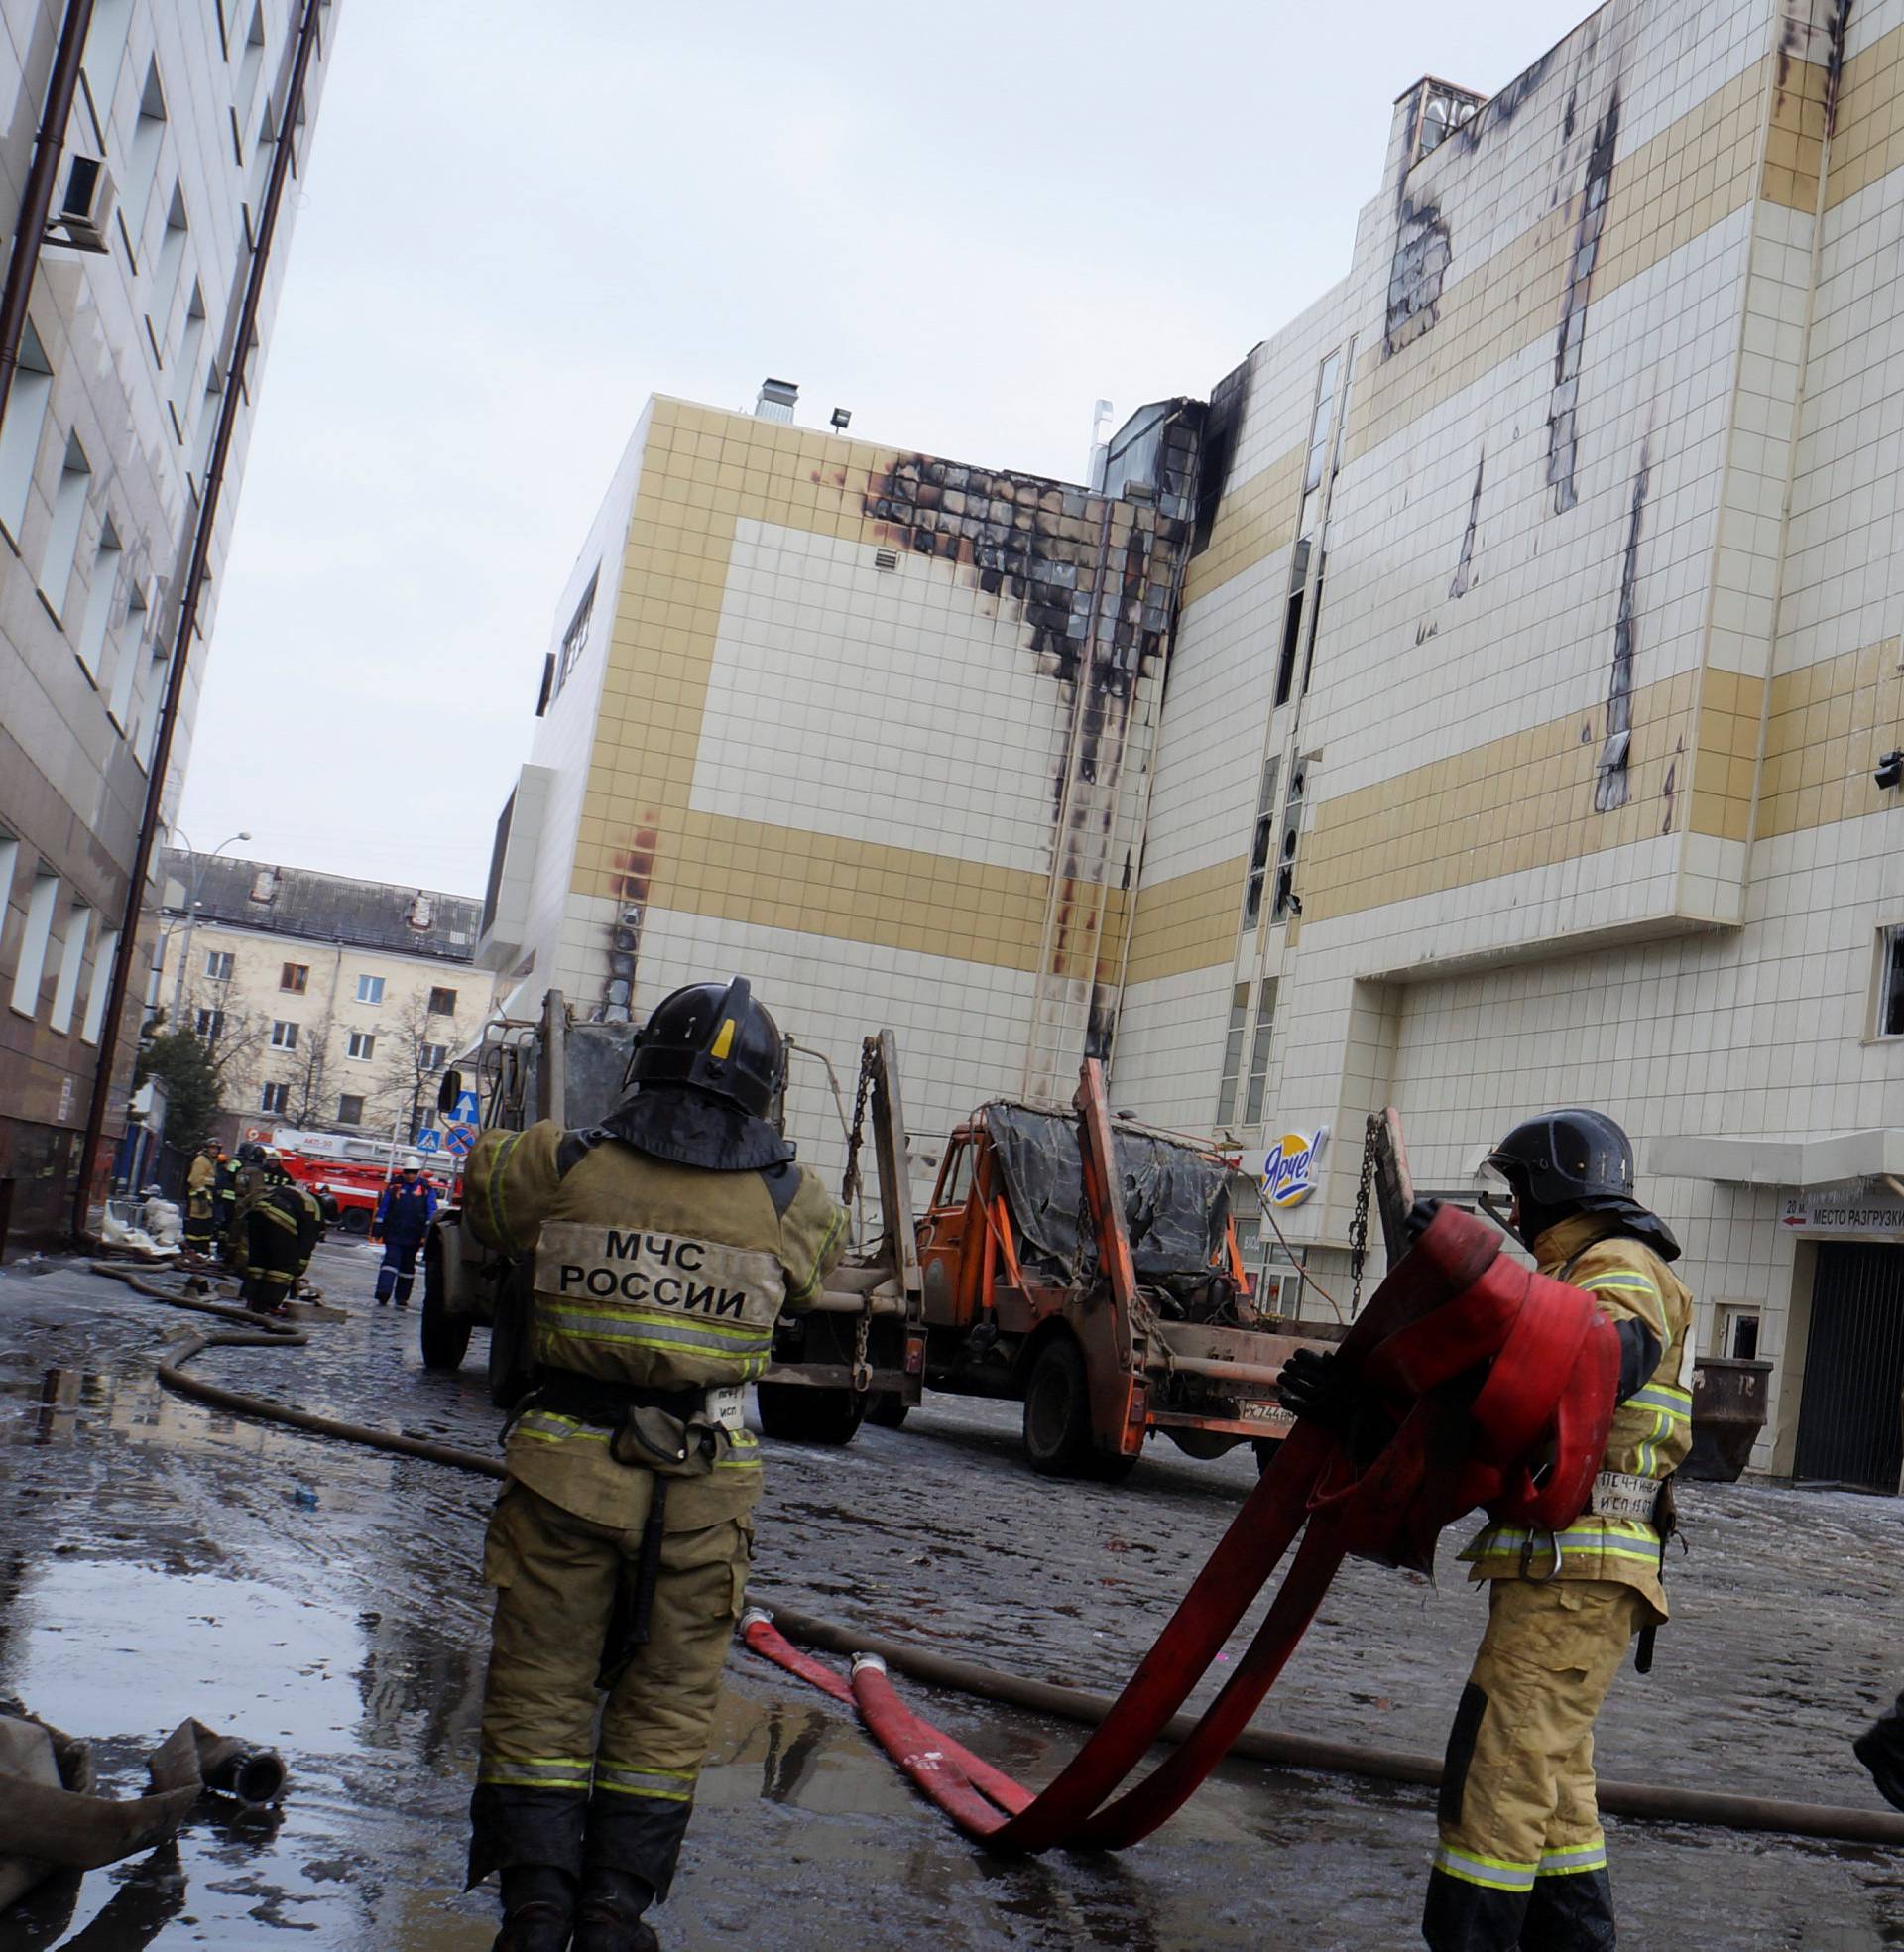 Members of the Emergency Situations Ministry work to extinguish a fire in a shopping mall in Kemerovo